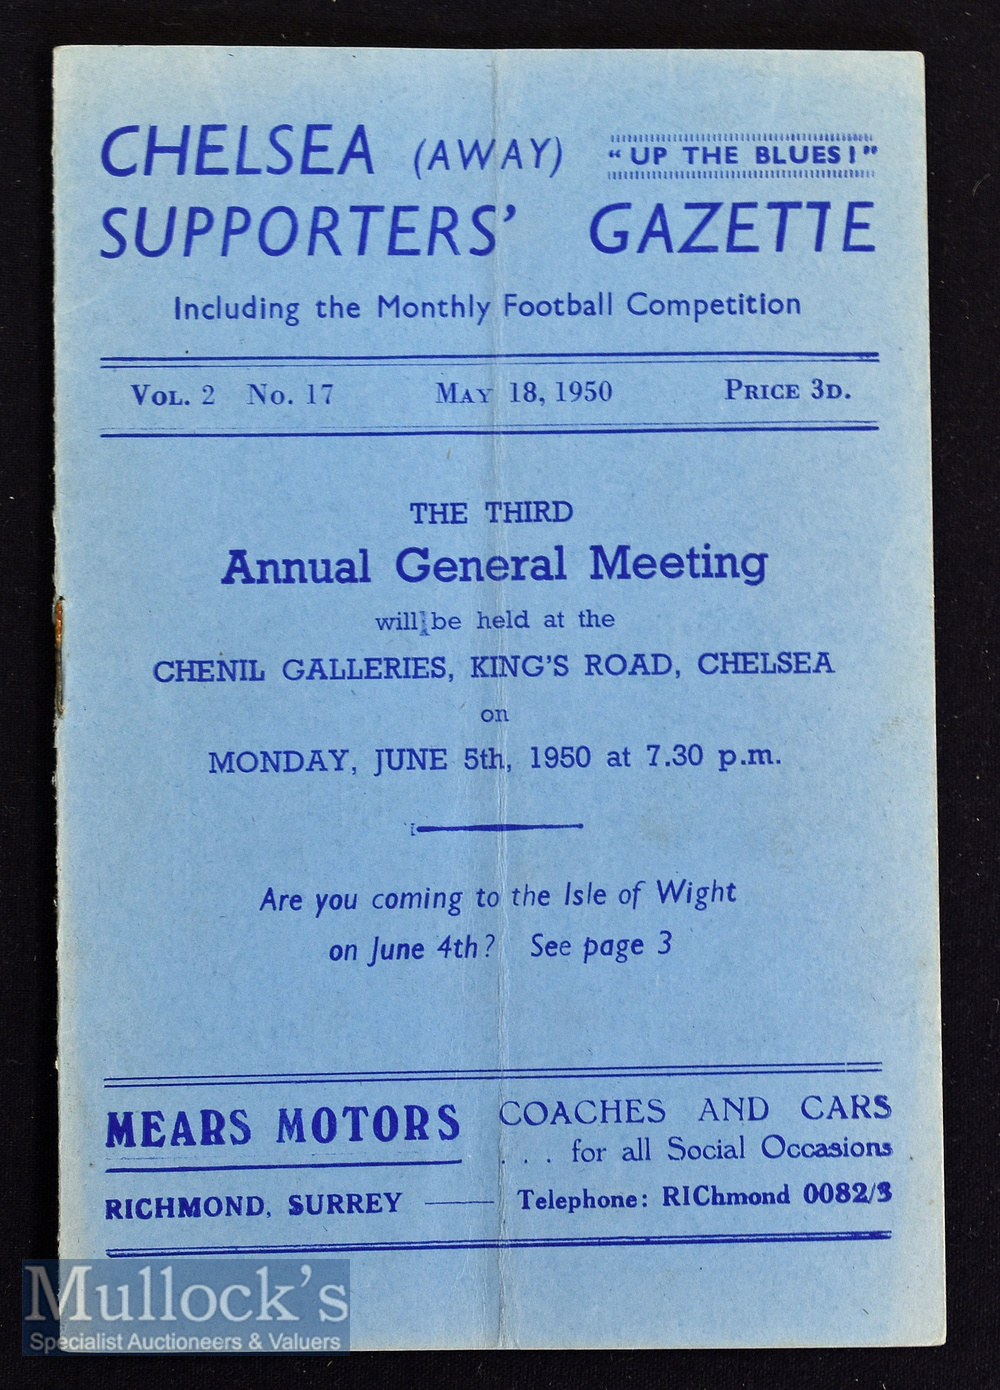 1950 Chelsea Supporters Gazette no.17 3rd Annual General Meeting^ date 5th June^ single sheets^